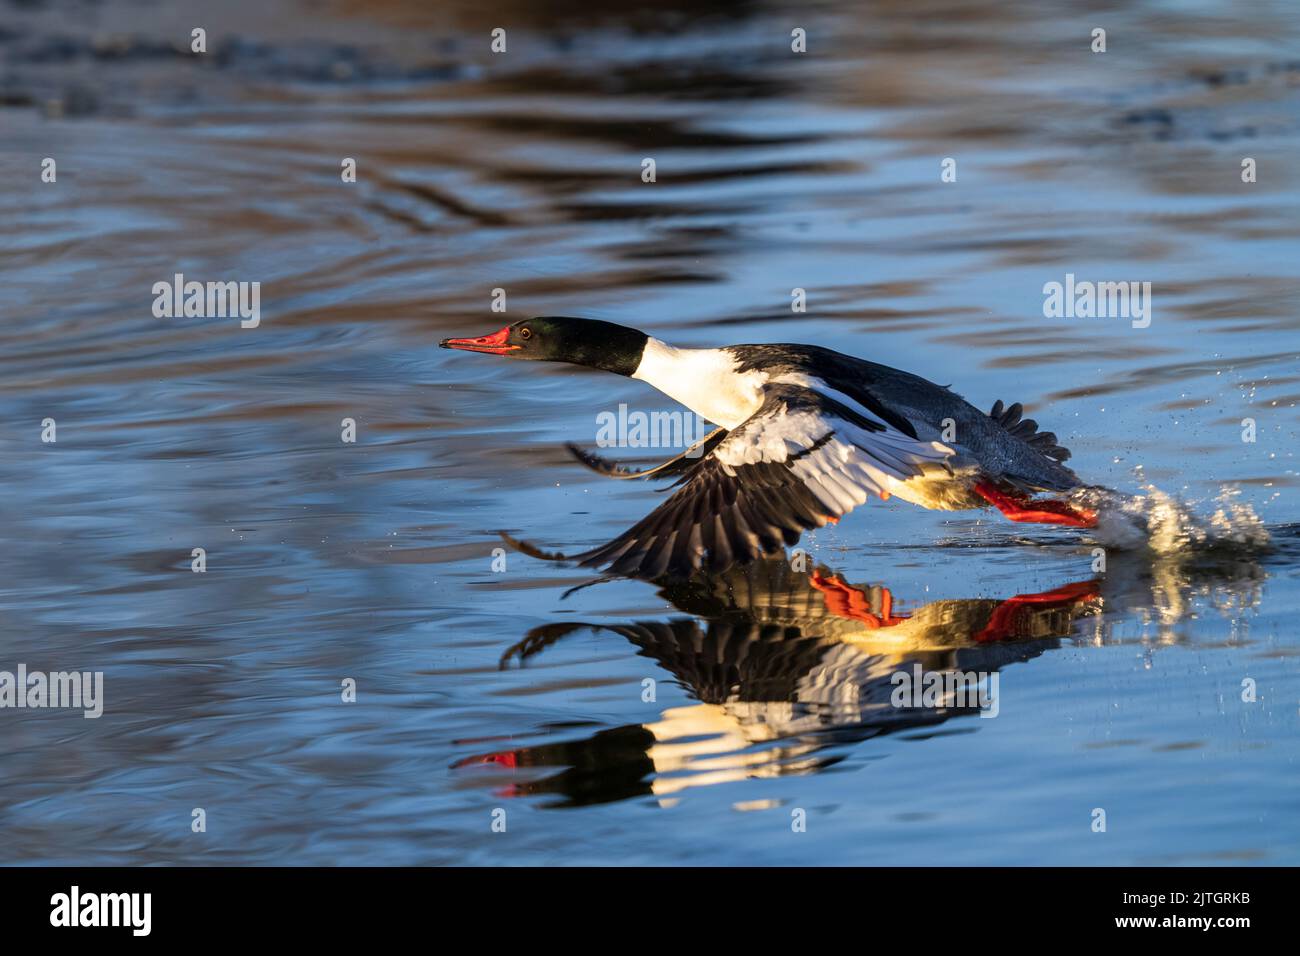 A Common Merganser gaining speed, flying very close to the water prior to take off. Viewed close up. Stock Photo